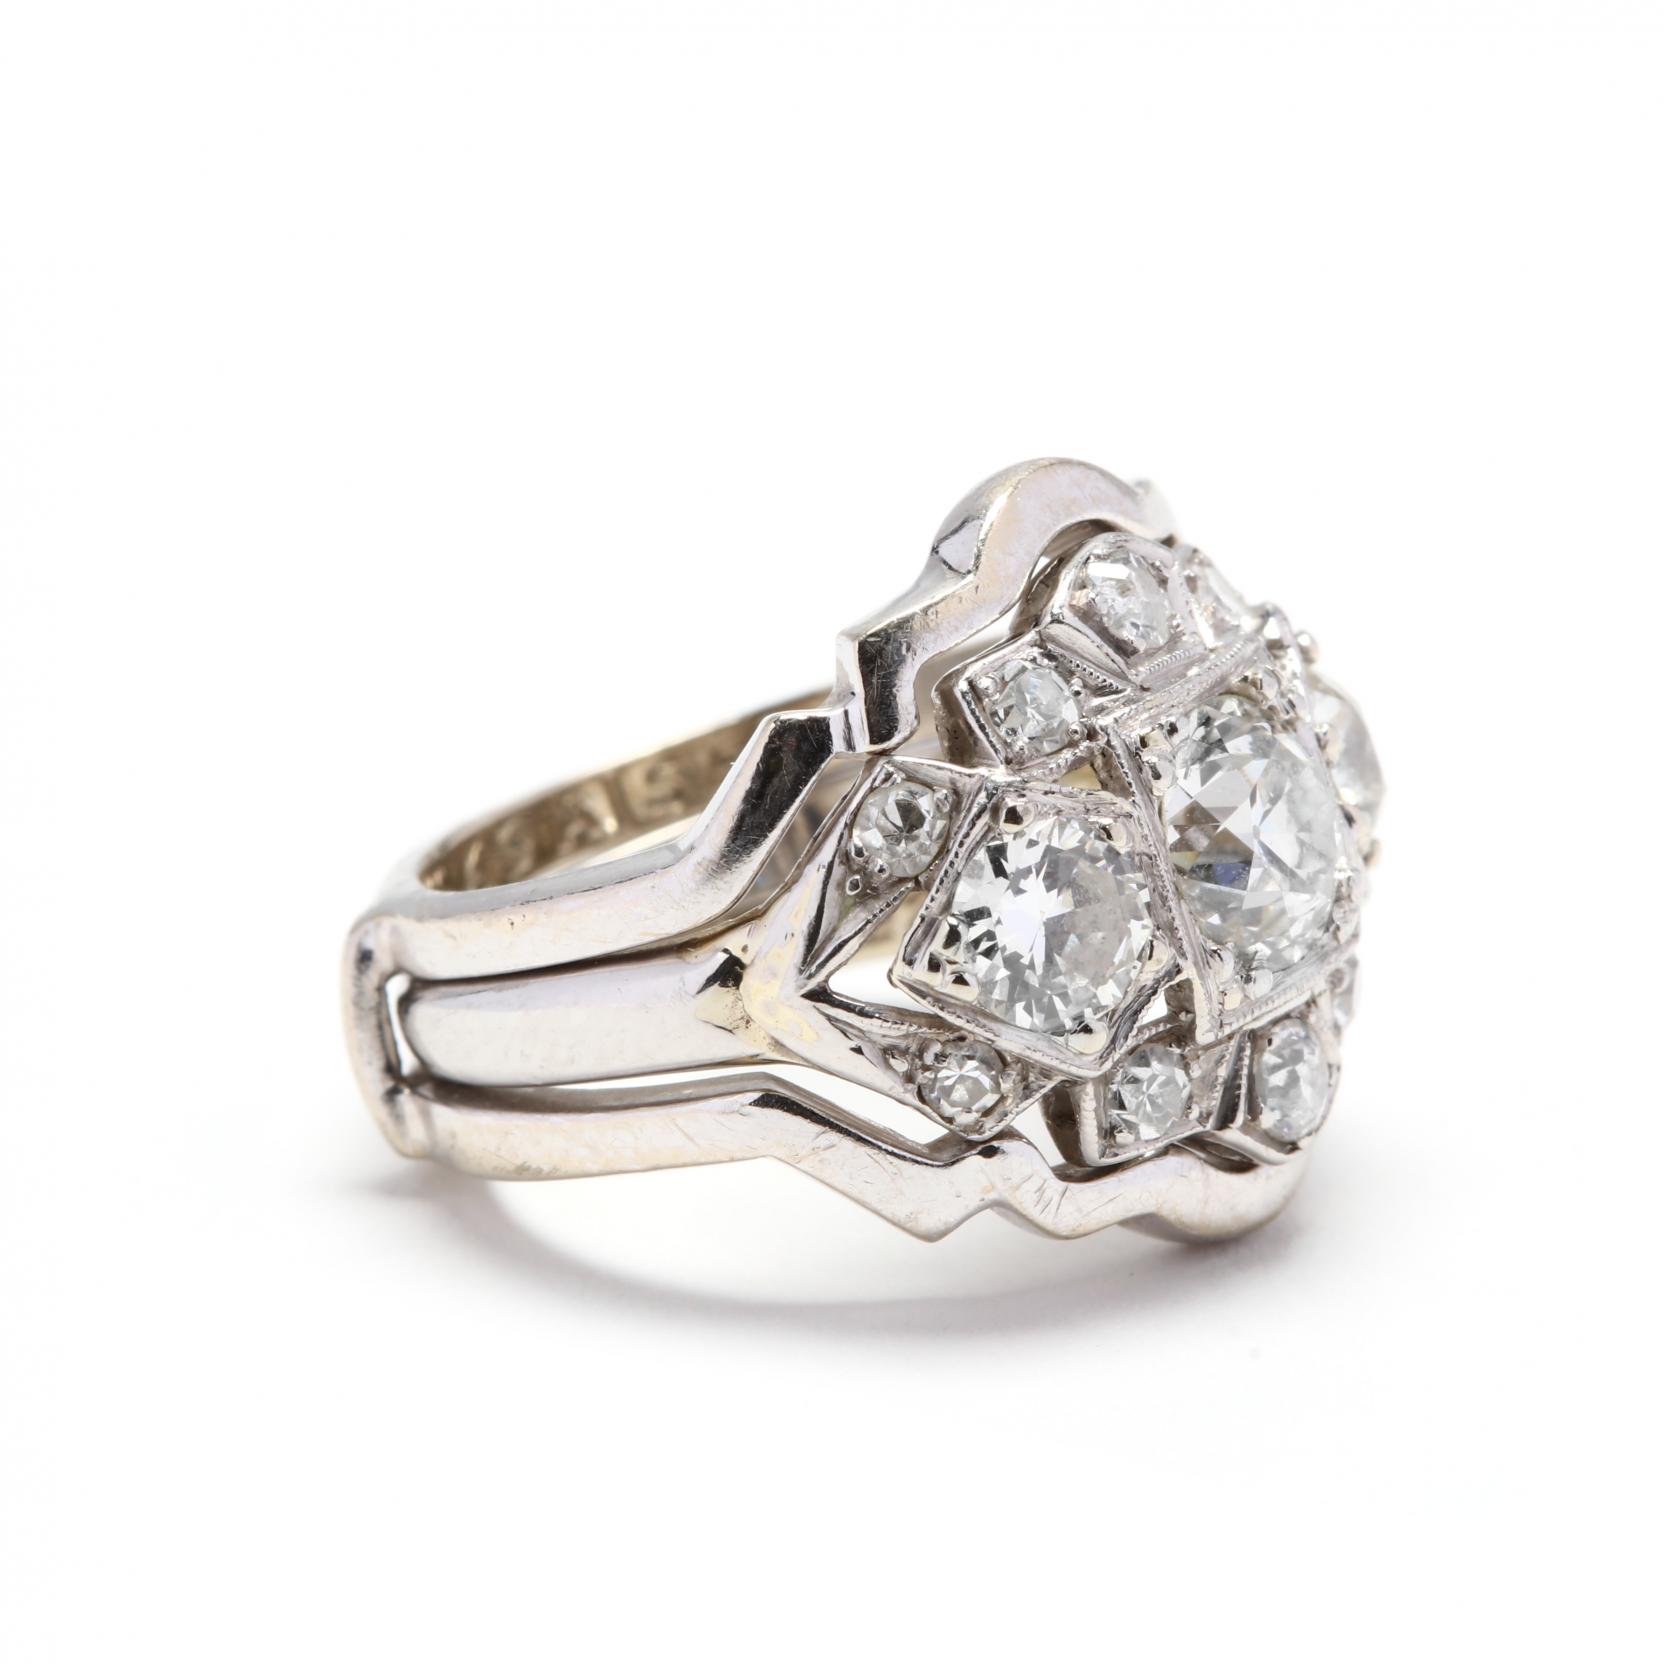 Vintage Platinum and Diamond Ring with 14KT White Gold Jacket - Image 3 of 9